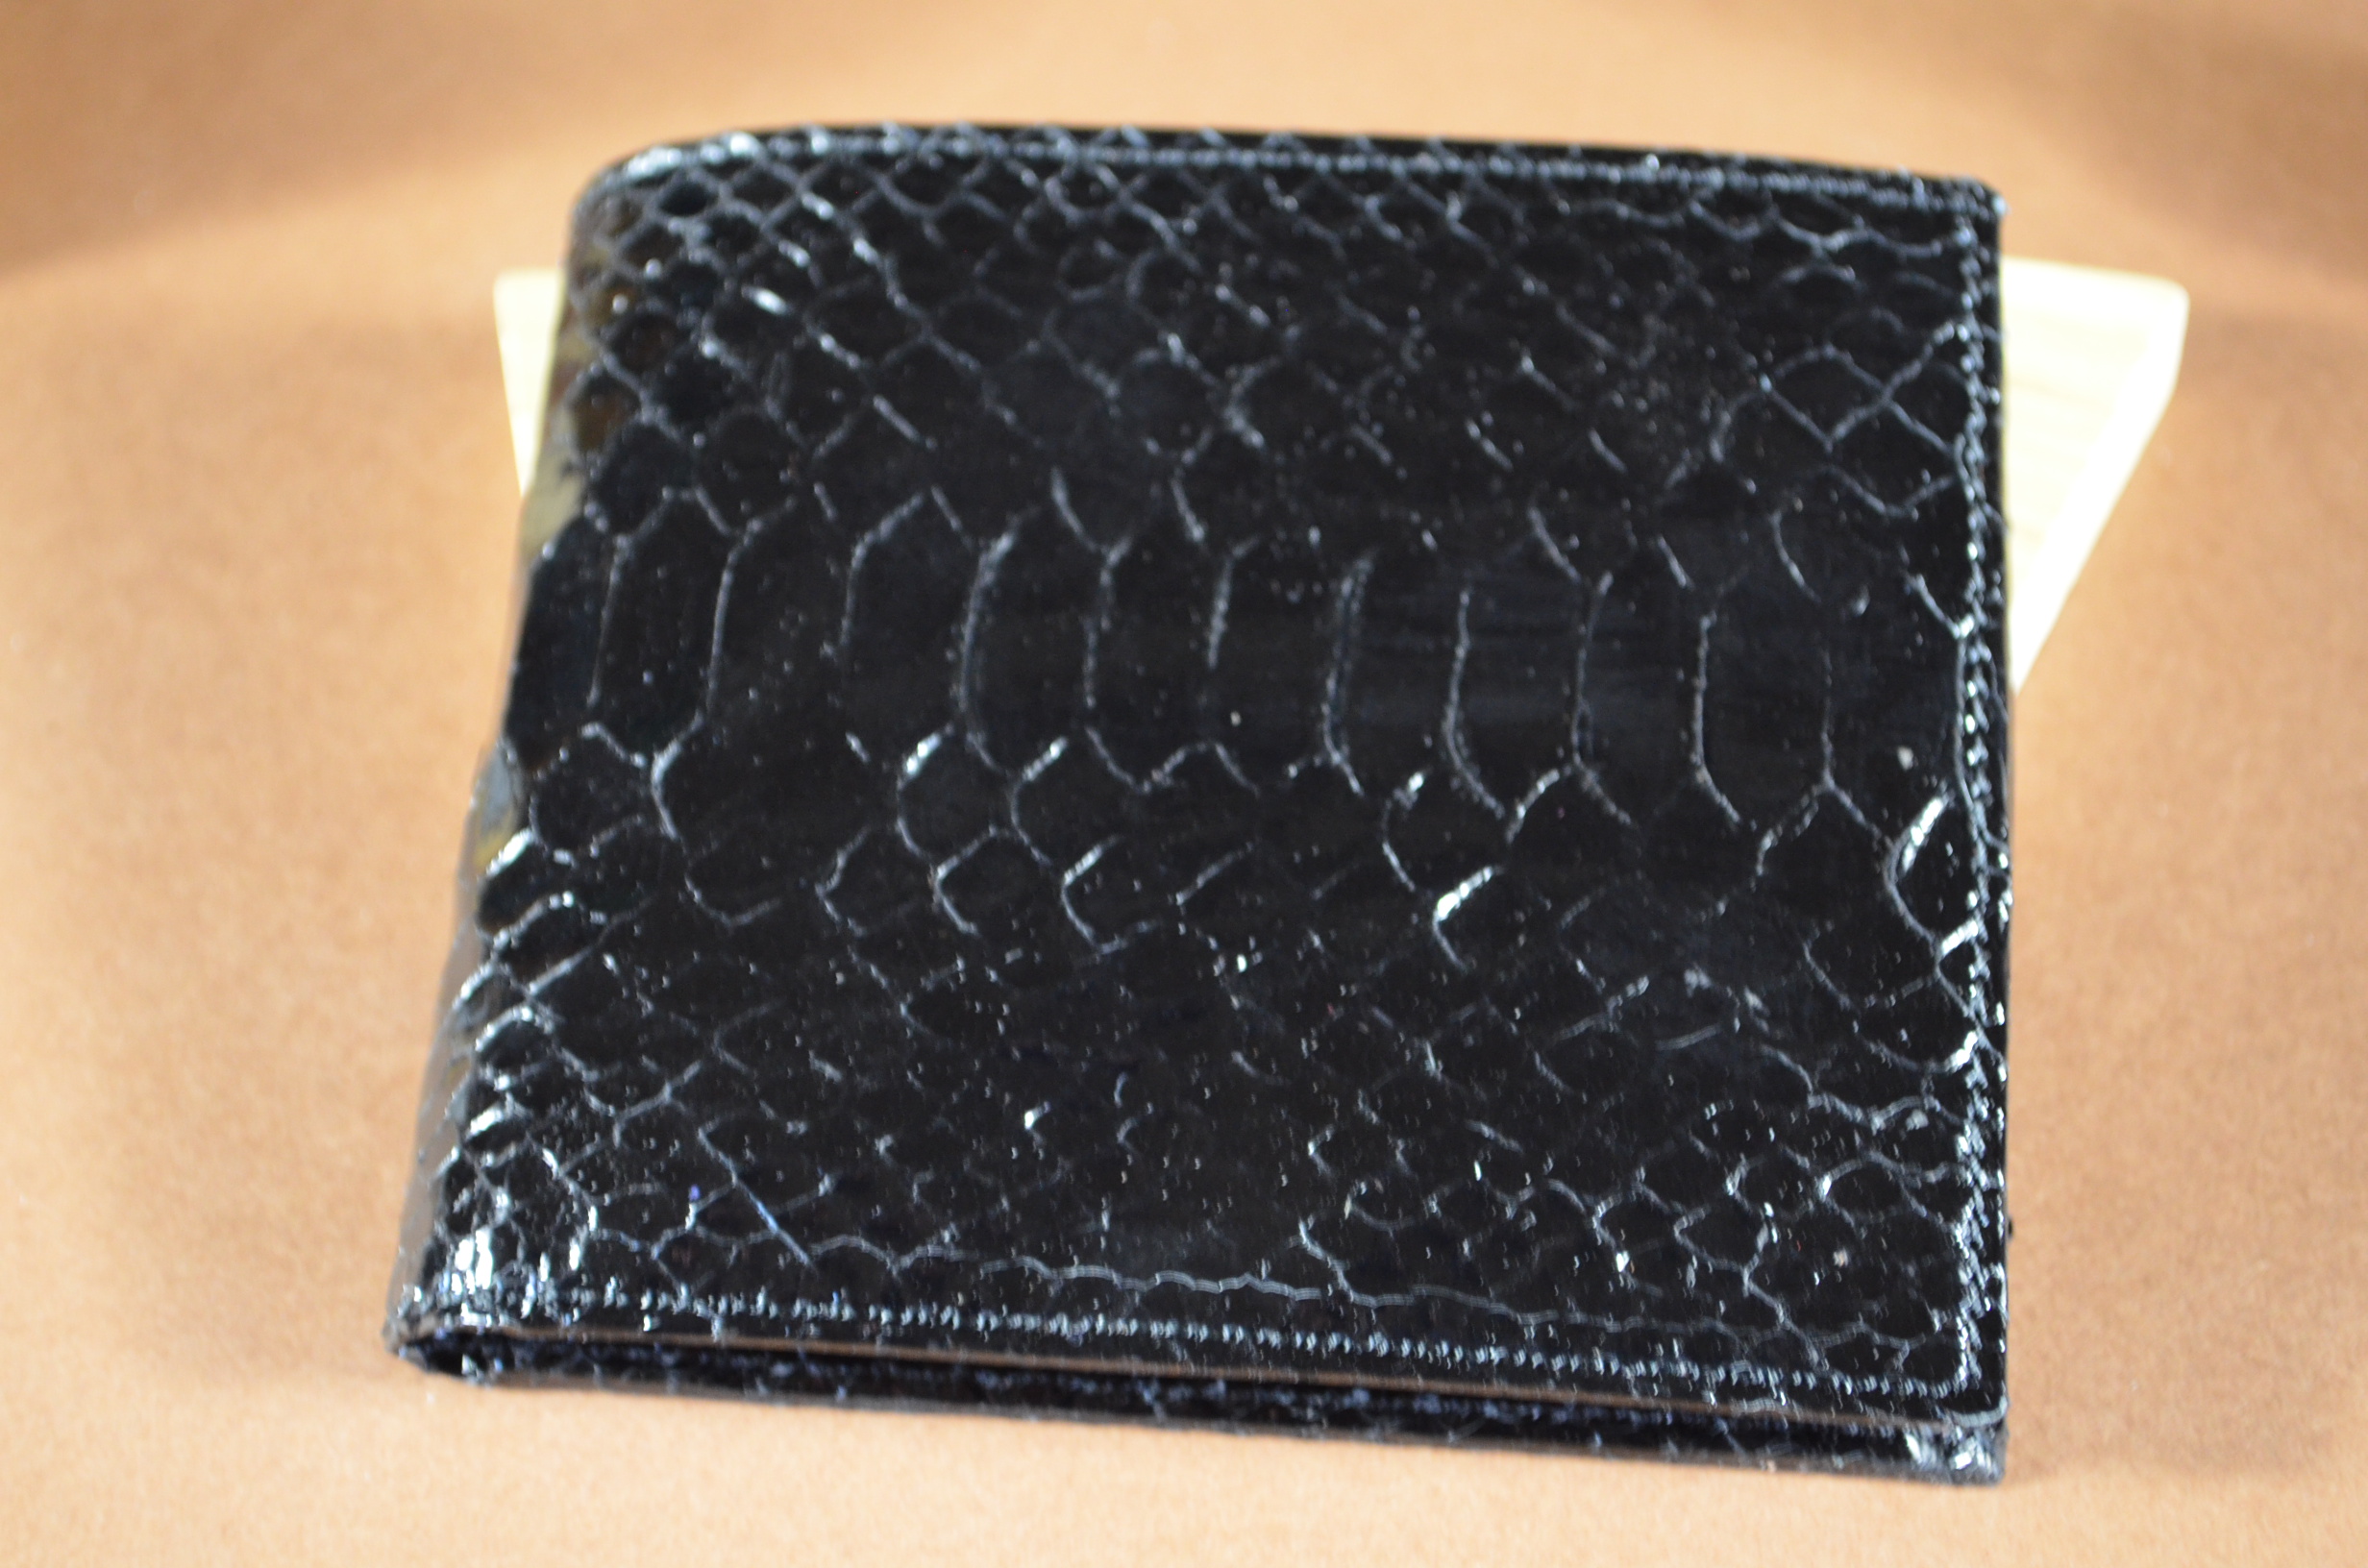 ROMA - PYTHON 5 BLACK is one of our hand crafted wallets, made using python belly shiny & calfskin / textil in the interior. Available in black color.